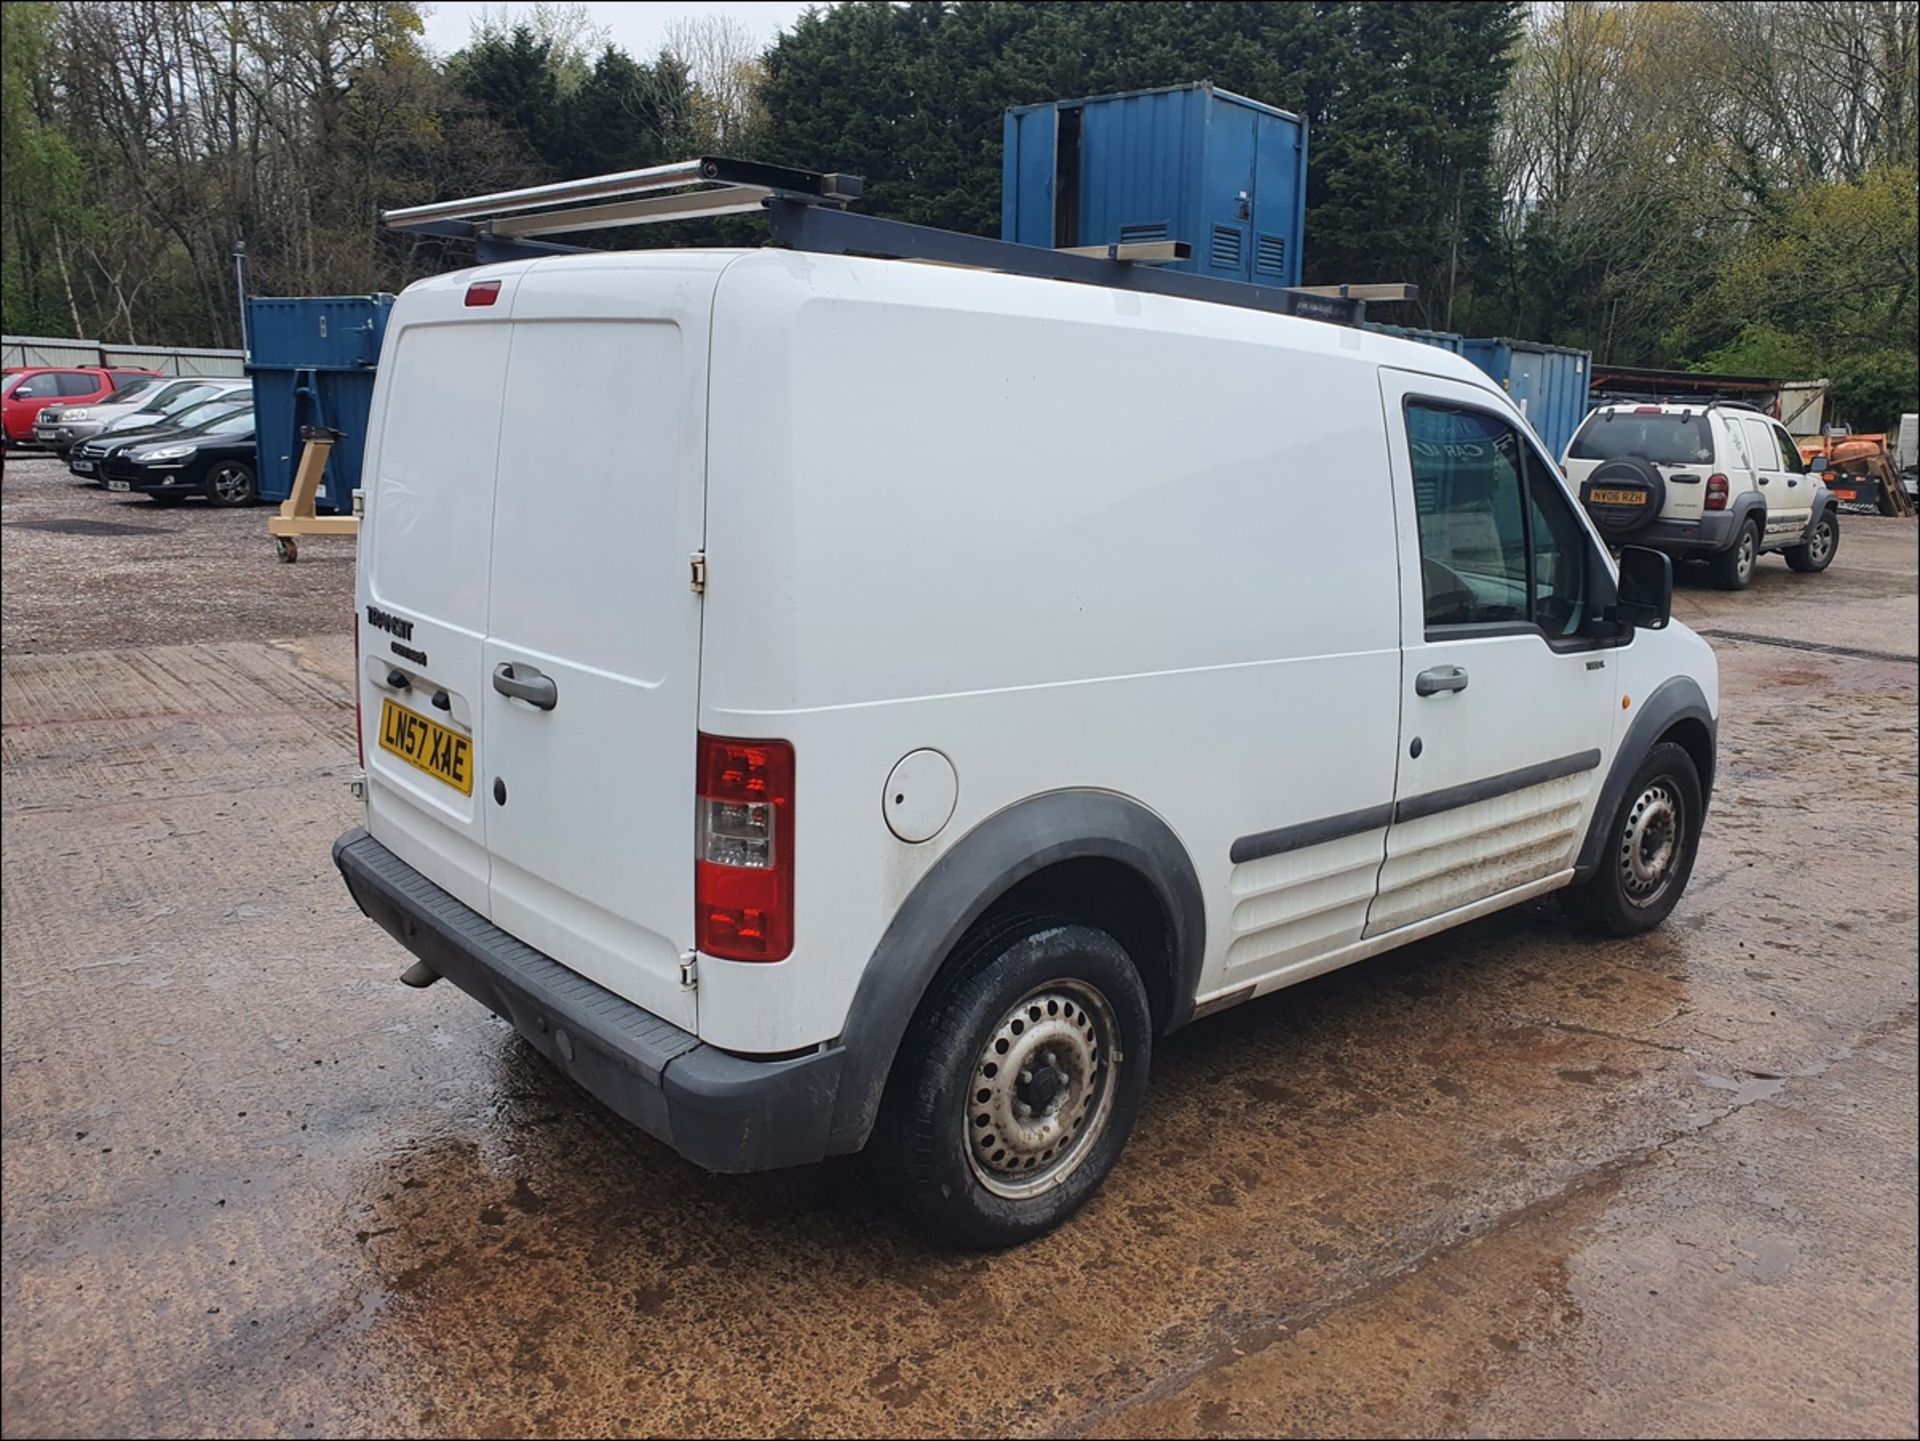 07/57 FORD TRANSIT CONNECT T200 L75 - 1753cc 5dr Van (White) - Image 8 of 12